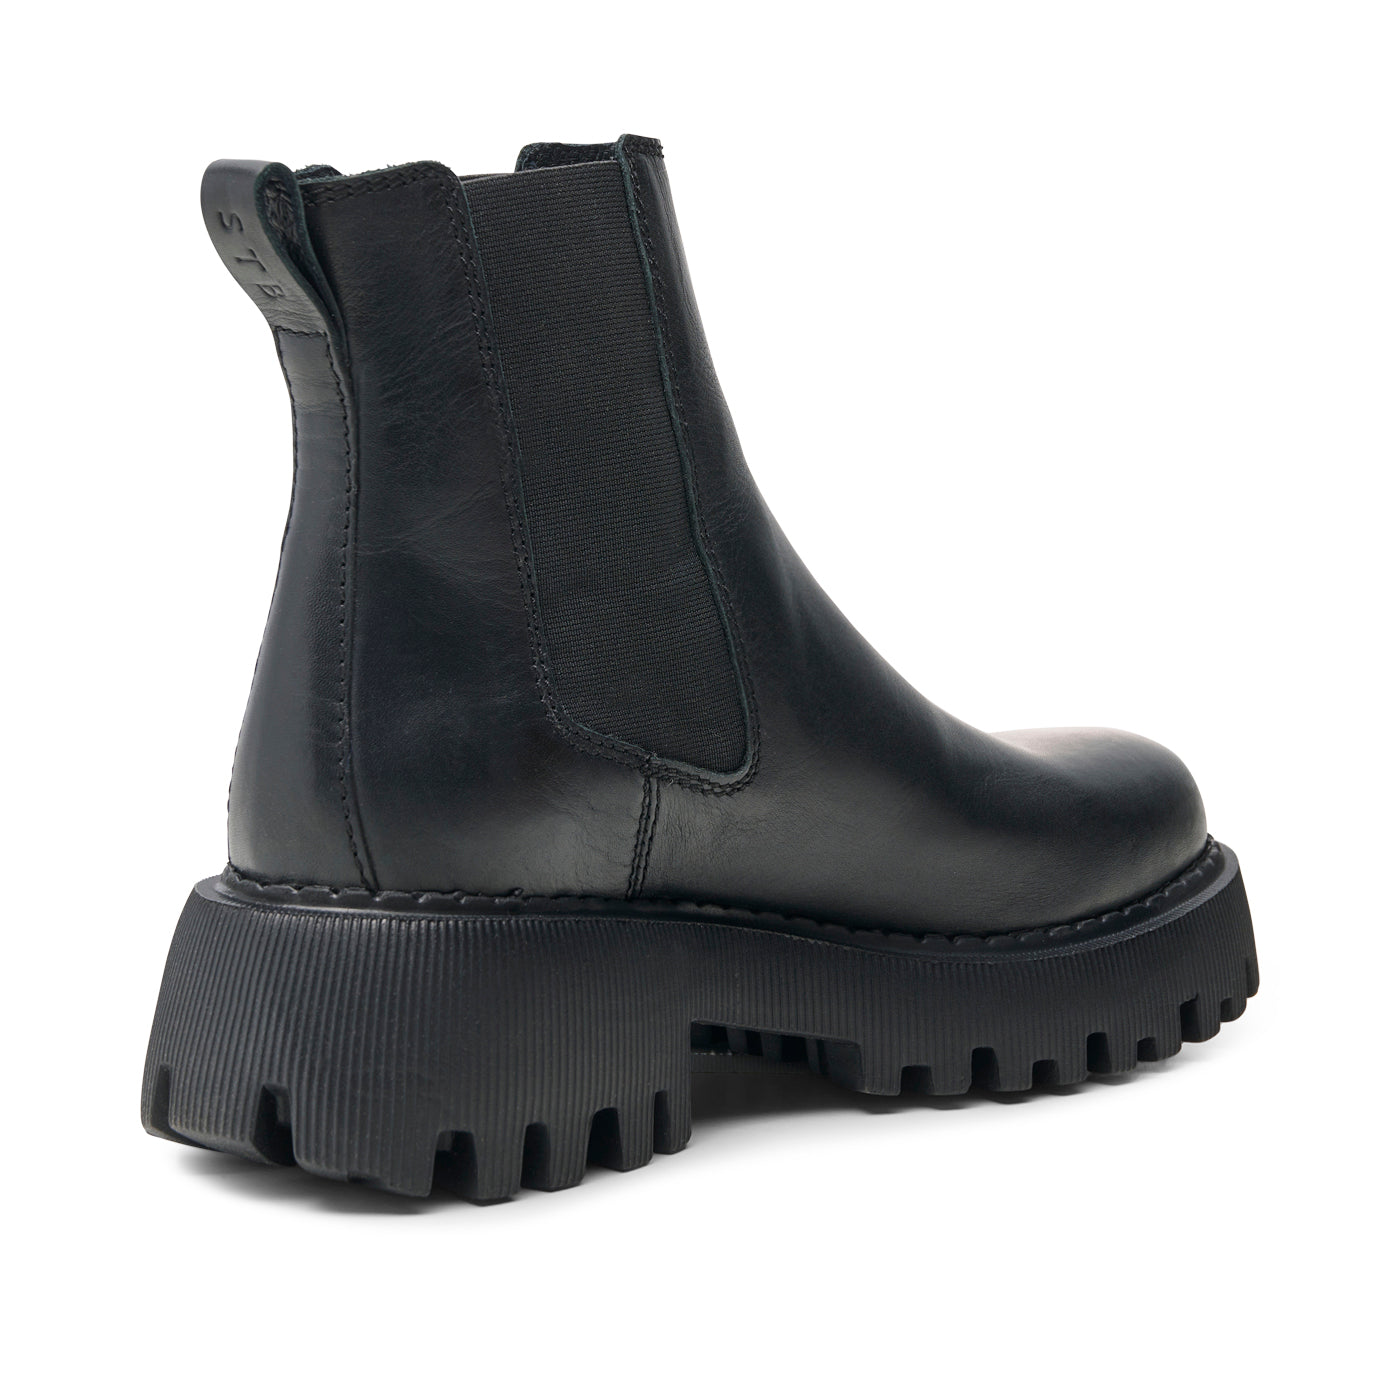 SHOE THE BEAR WOMENS Posey chelsea boot leather Boots 110 BLACK